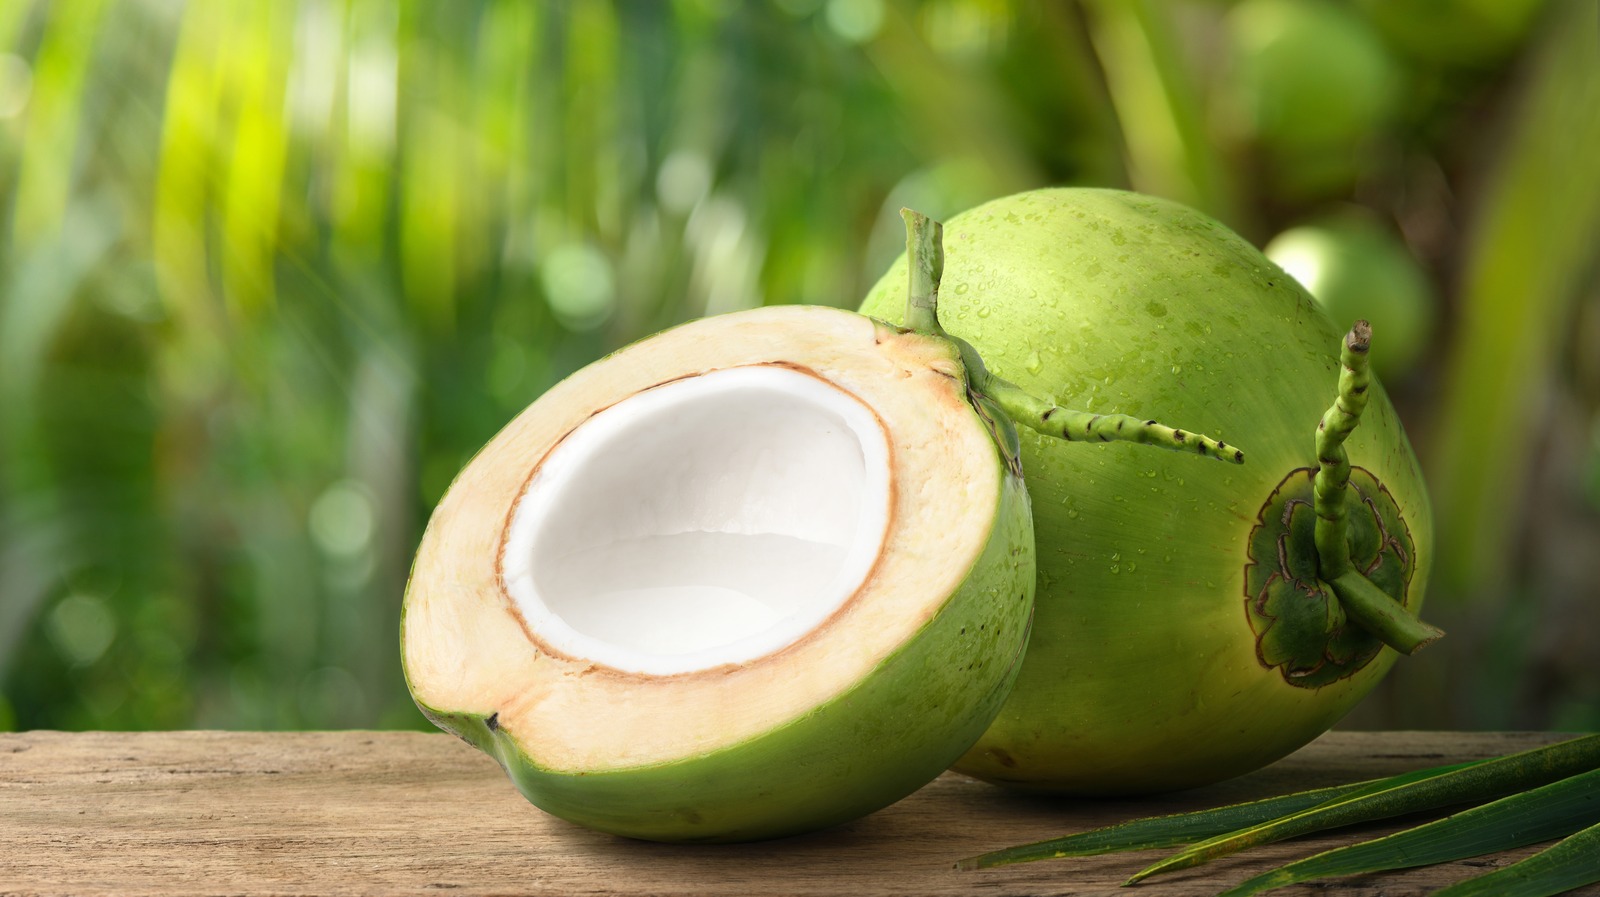 14 Facts About Coconut - Facts.net